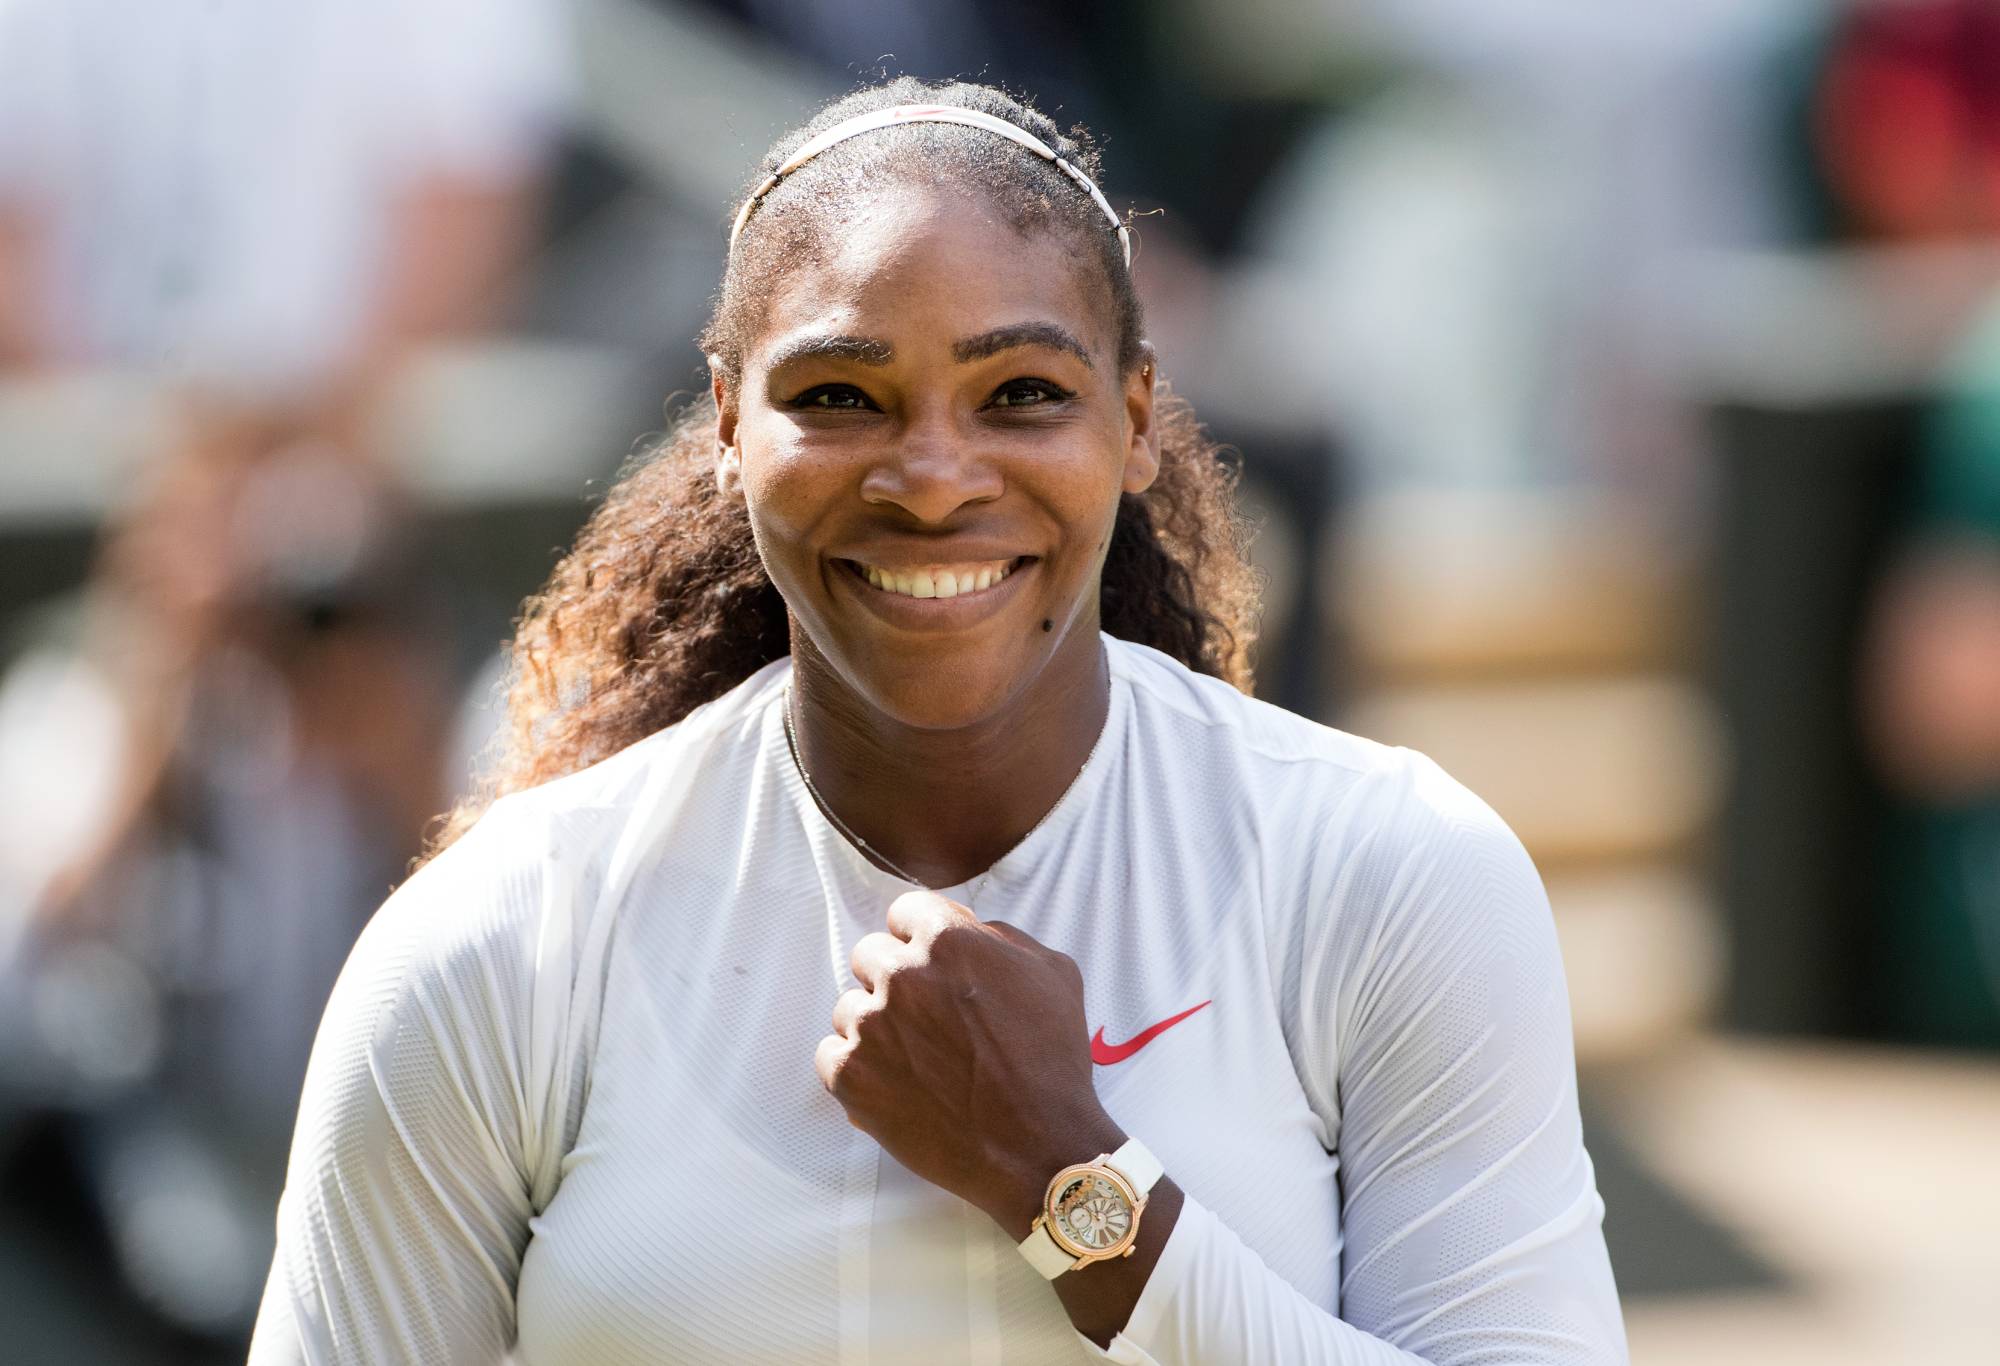 JULY 12: Serena Williams of the United States celebrates her win against Julia Goerges of Germany in the Ladies' Singles Semi-finals on Center Court during the Wimbledon Lawn Tennis Championships at the All England Lawn Tennis and Croquet Club at Wimbledon on July 12, 2018 in London, England. (Photo by Tim Clayton/Corbis via Getty Images